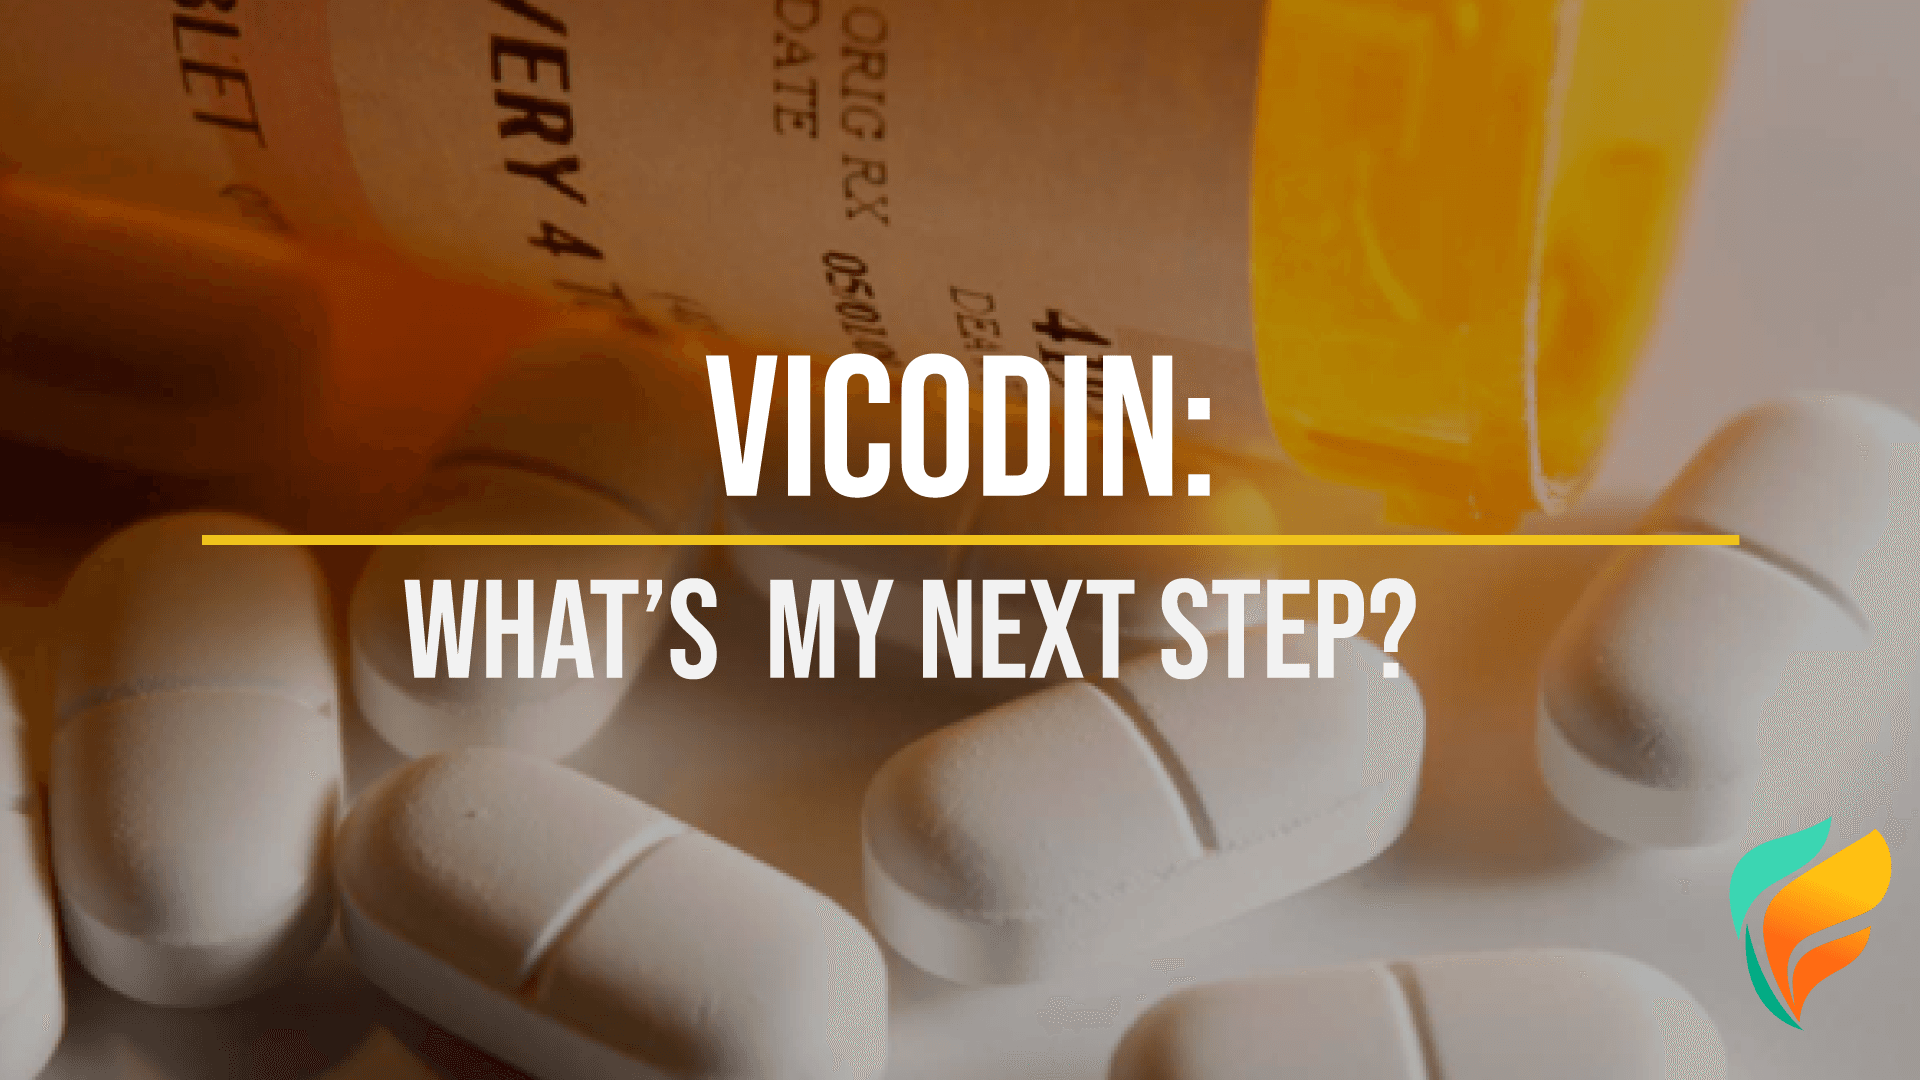 How Long Does Vicodin Stay In Your System?